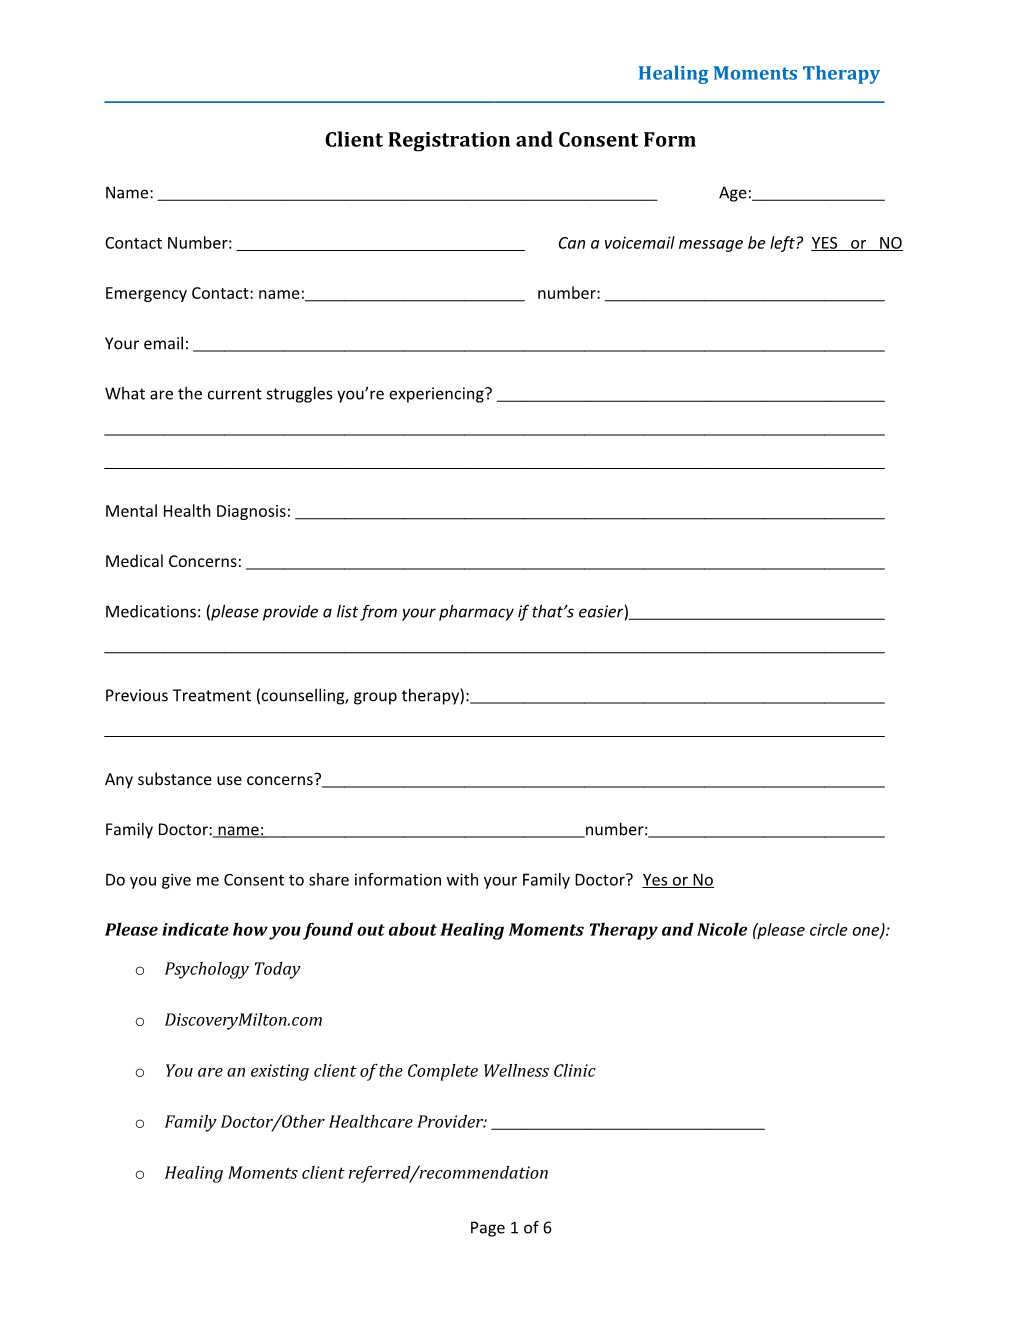 Client Registration and Consent Form